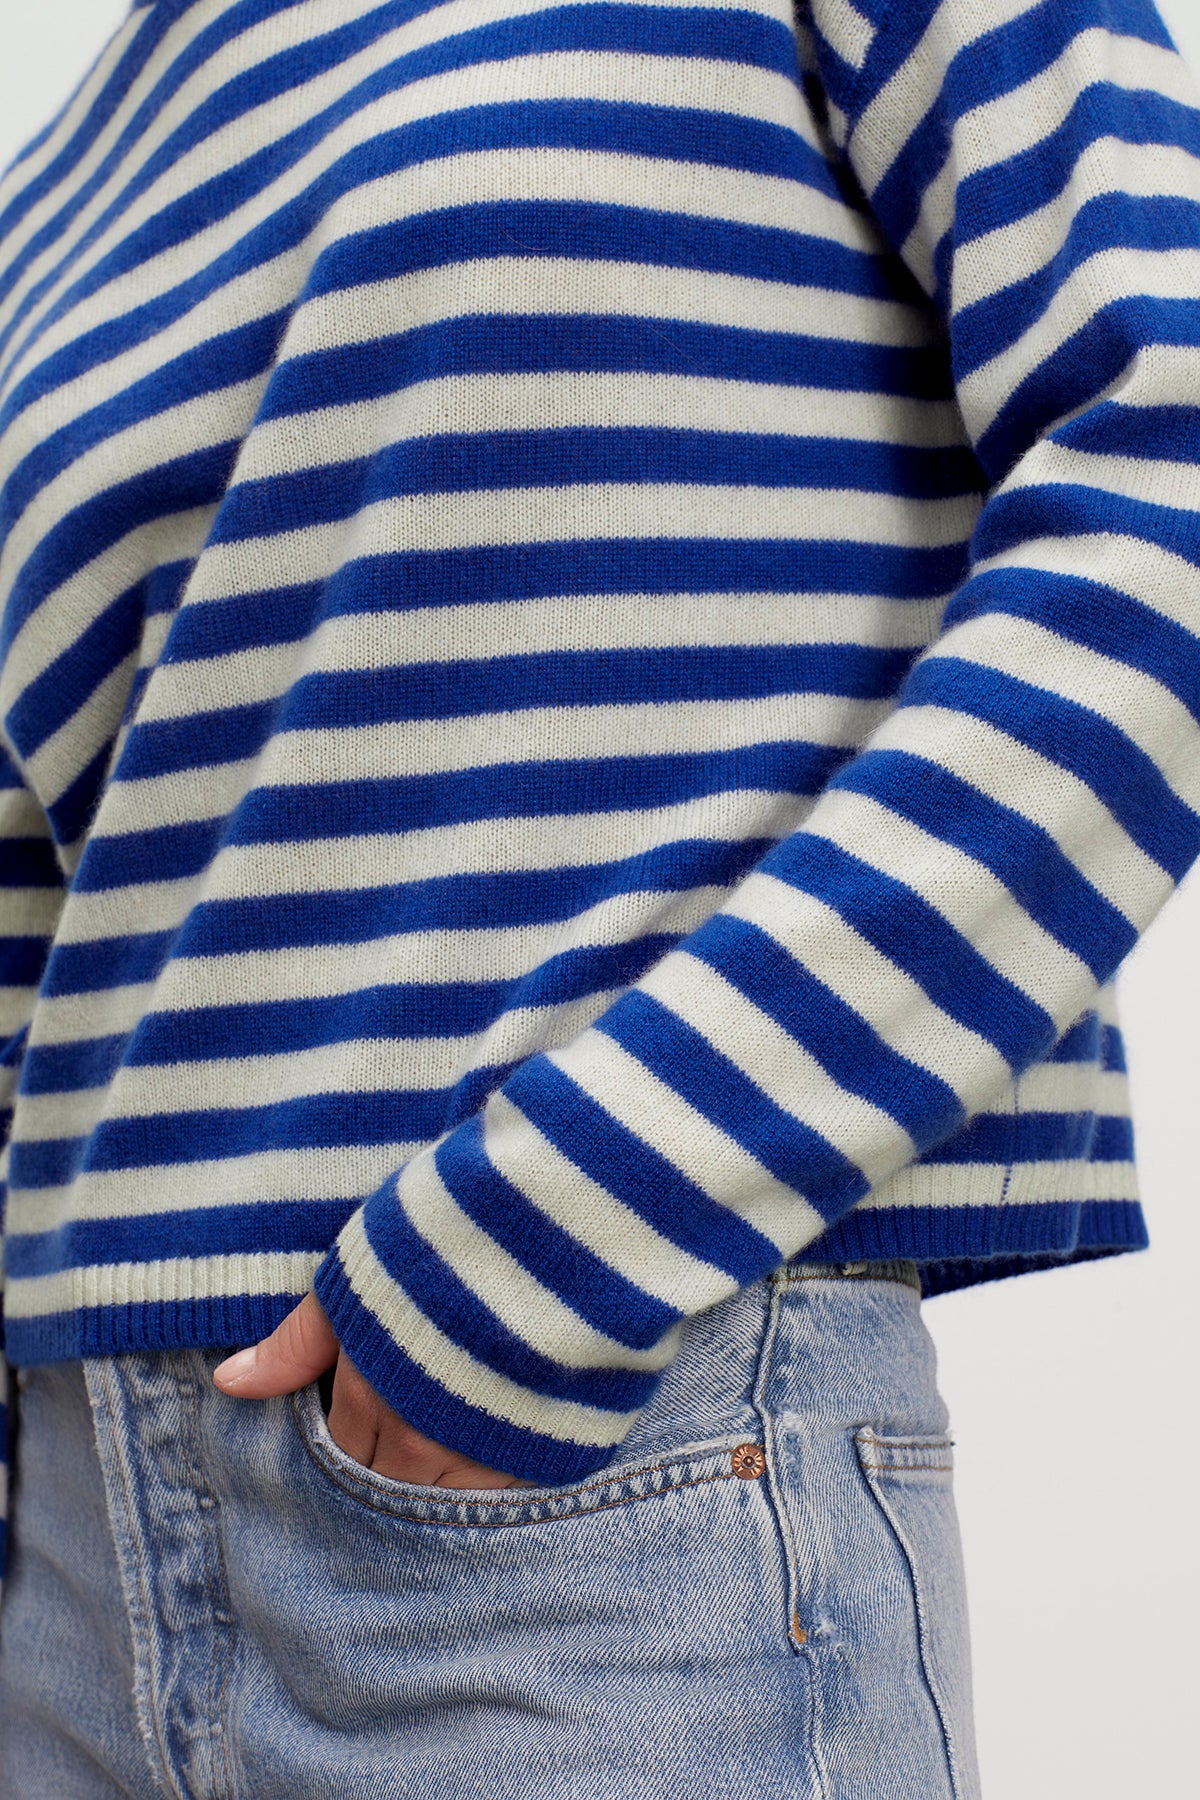 A woman wearing the Velvet by Graham & Spencer ALYSSA CASHMERE STRIPED CREW NECK SWEATER.-35702033219777